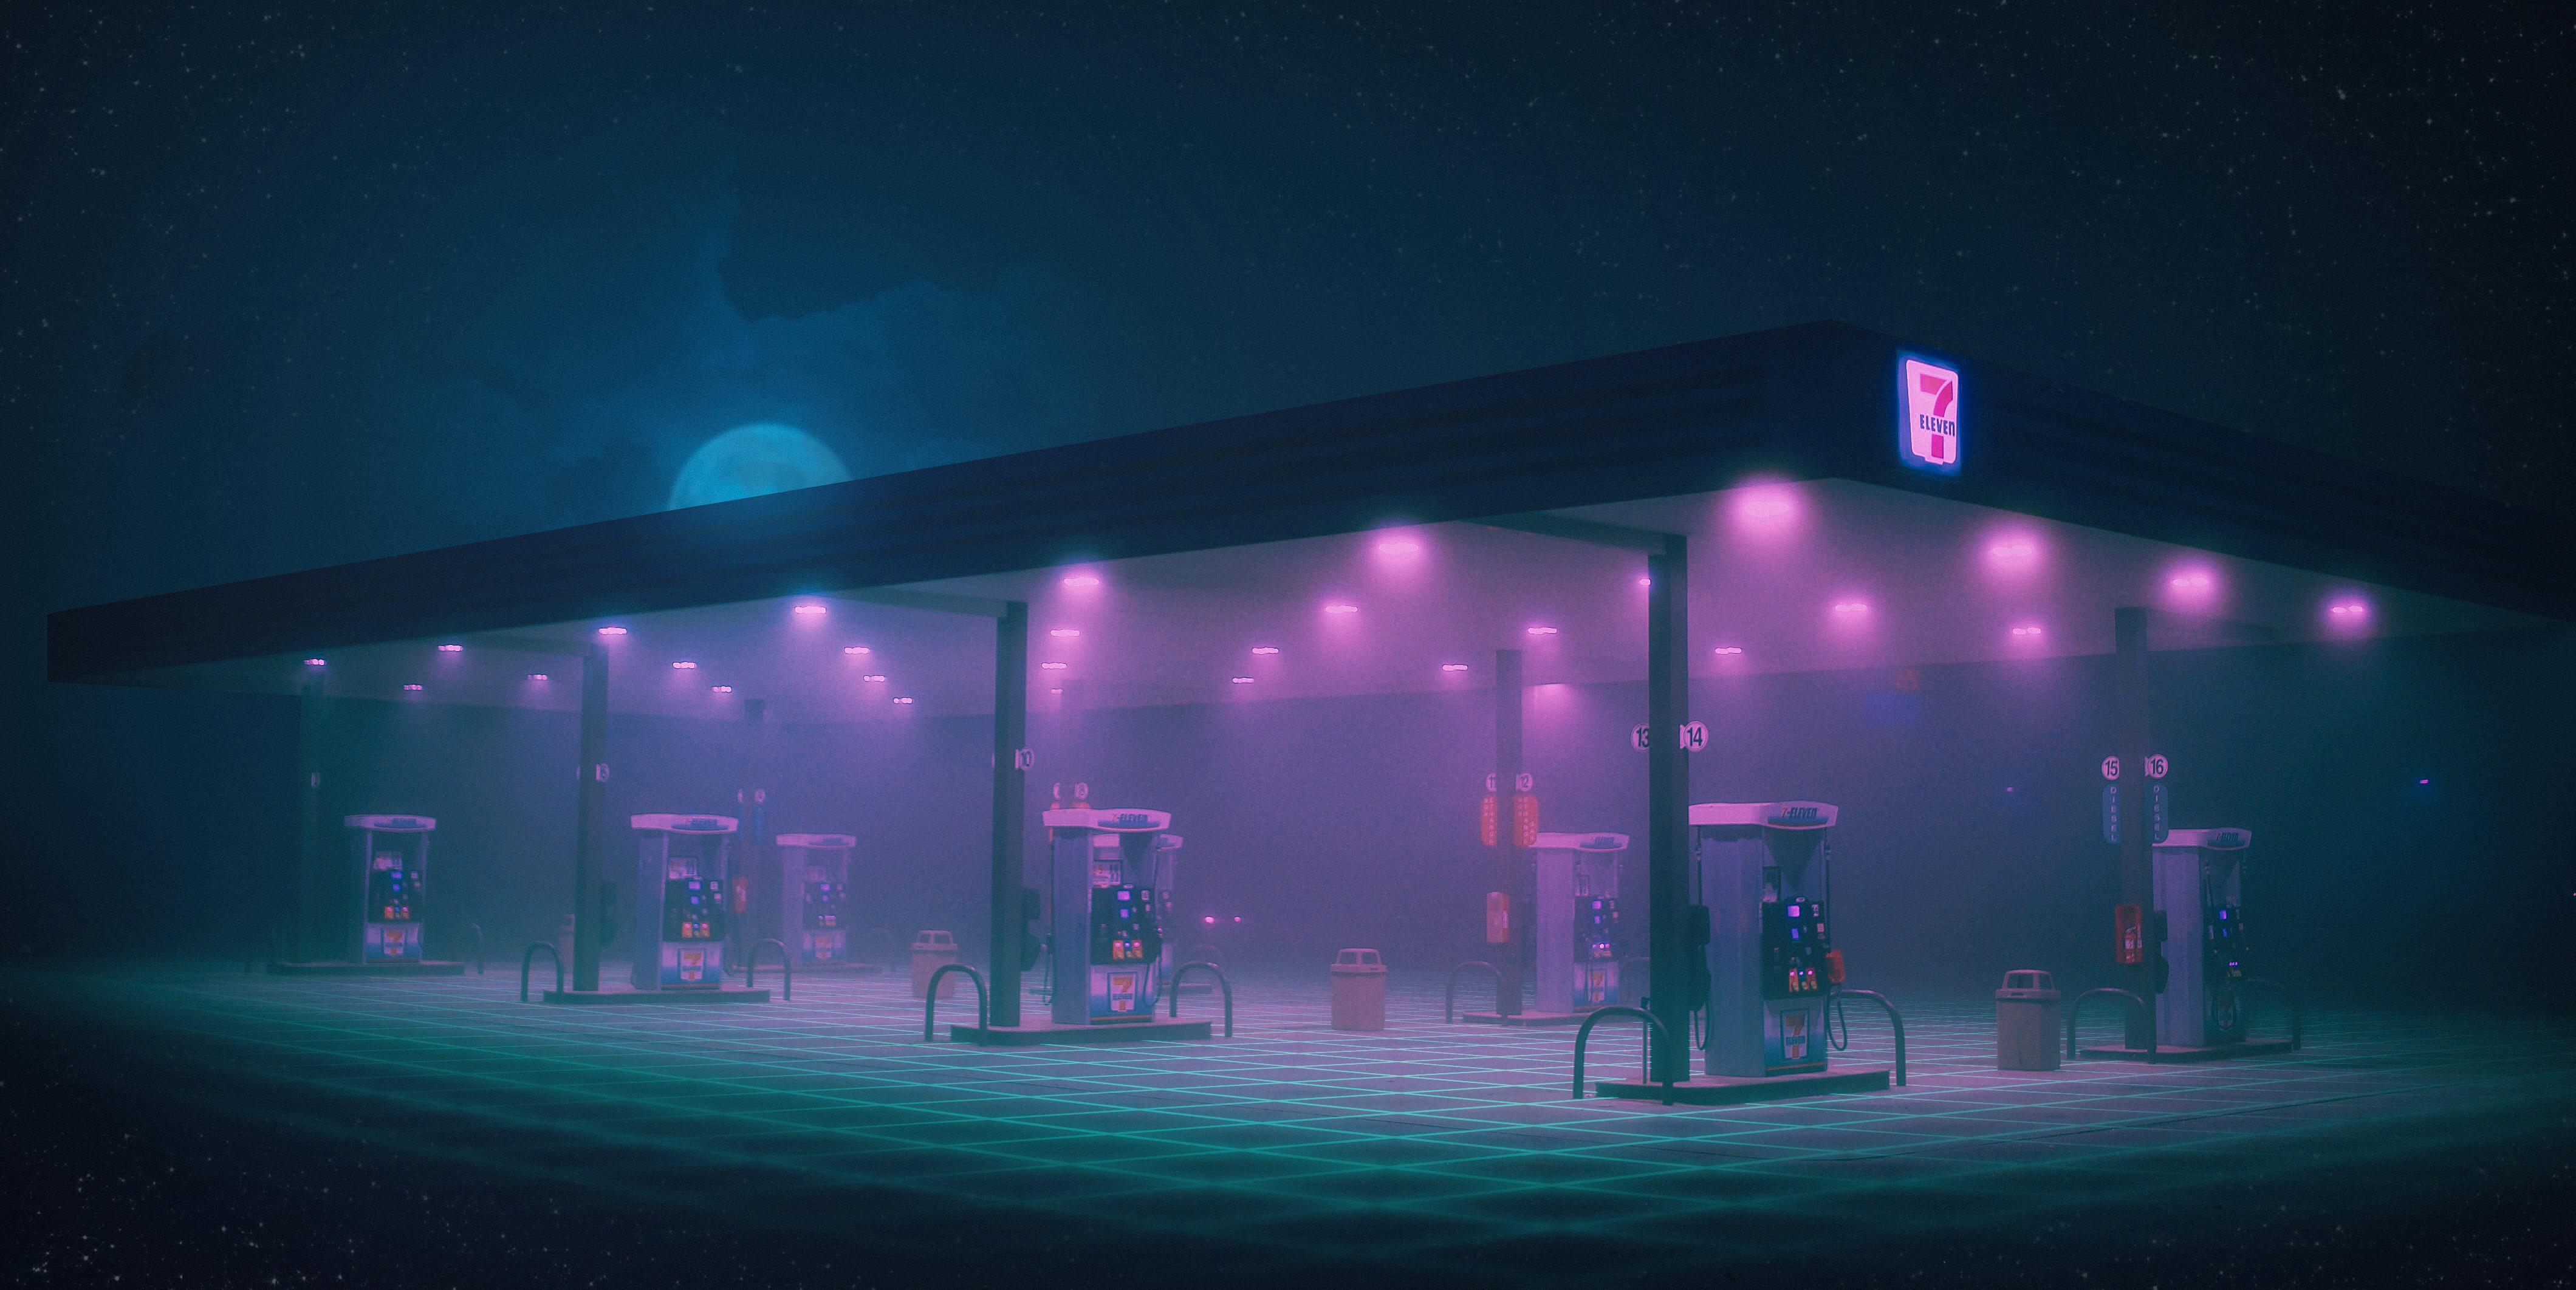 Gas Station Minimalist, HD Artist, 4k Wallpaper, Image, Background, Photo and Picture